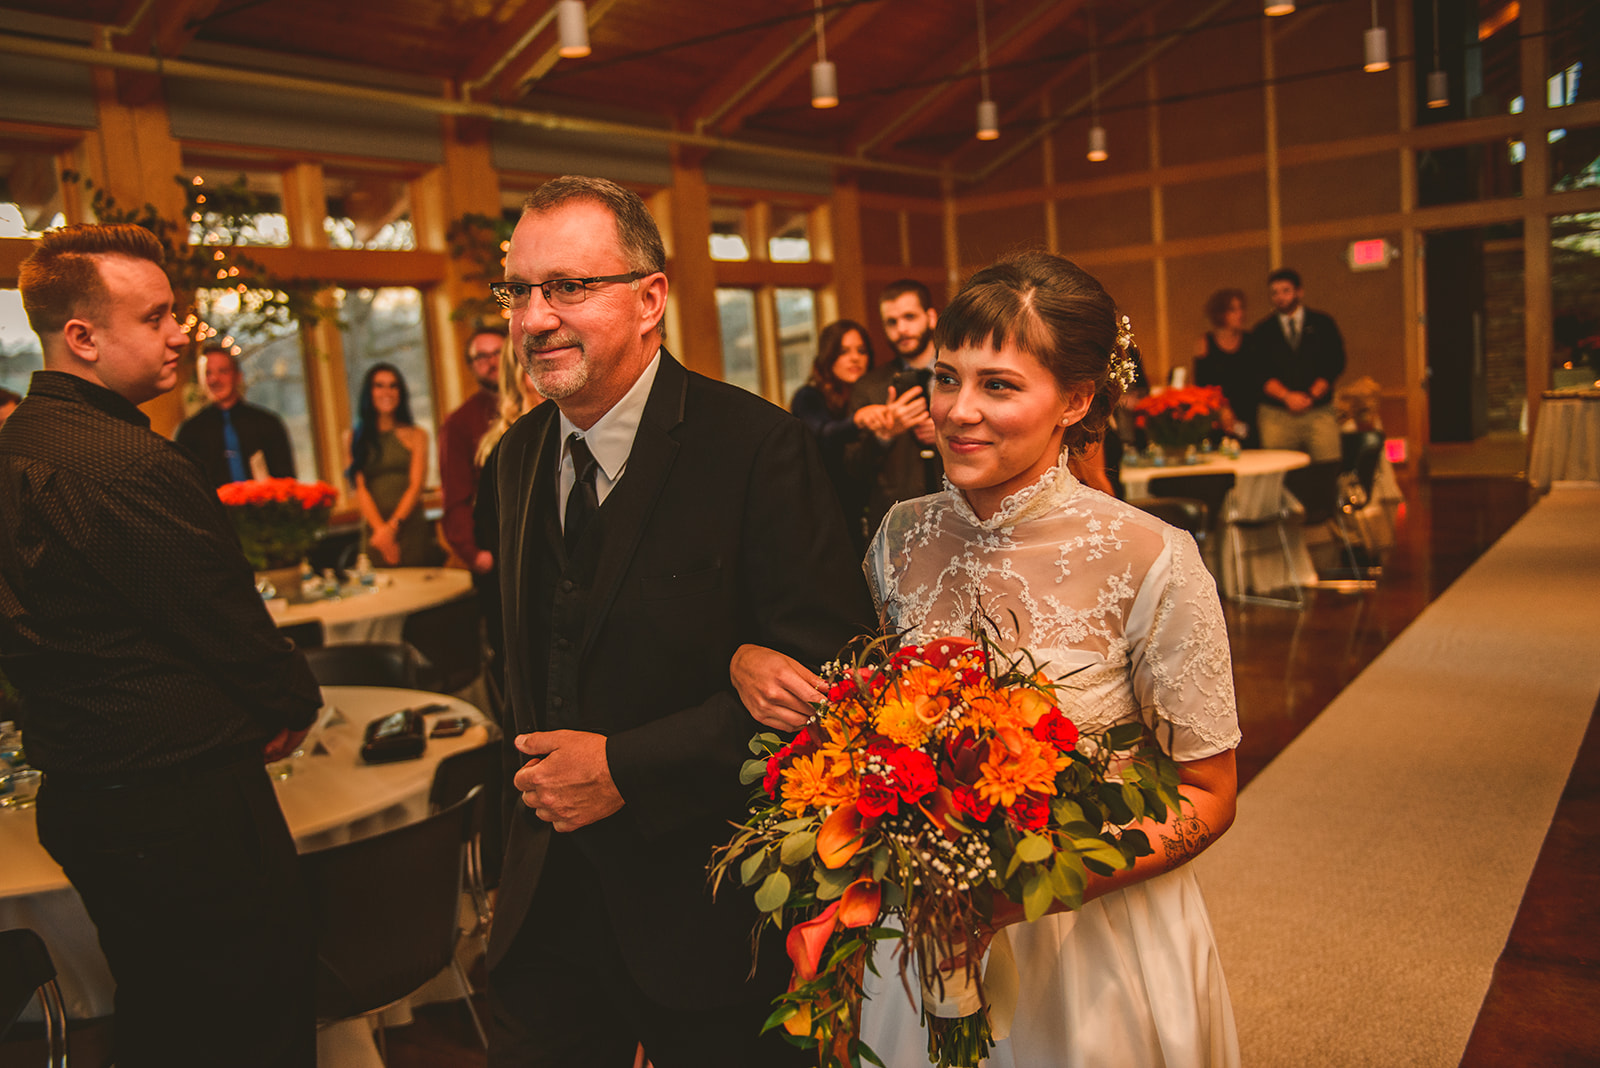 the bride smiling at her groom as her father walks her down the aisle at the Four Rivers Environmental Education Center in Channahon